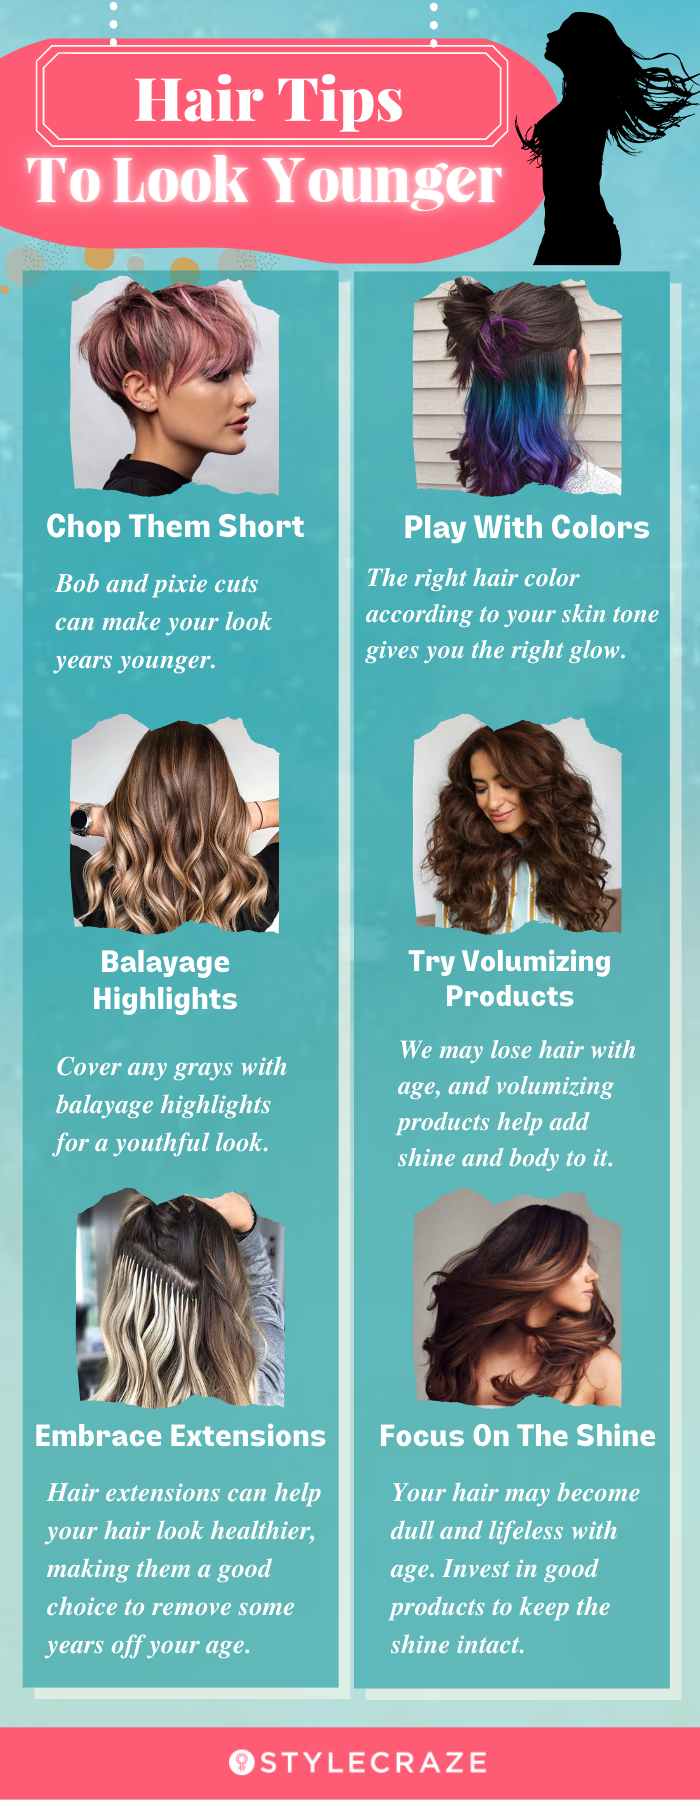 hair tips to look younger (infographic)